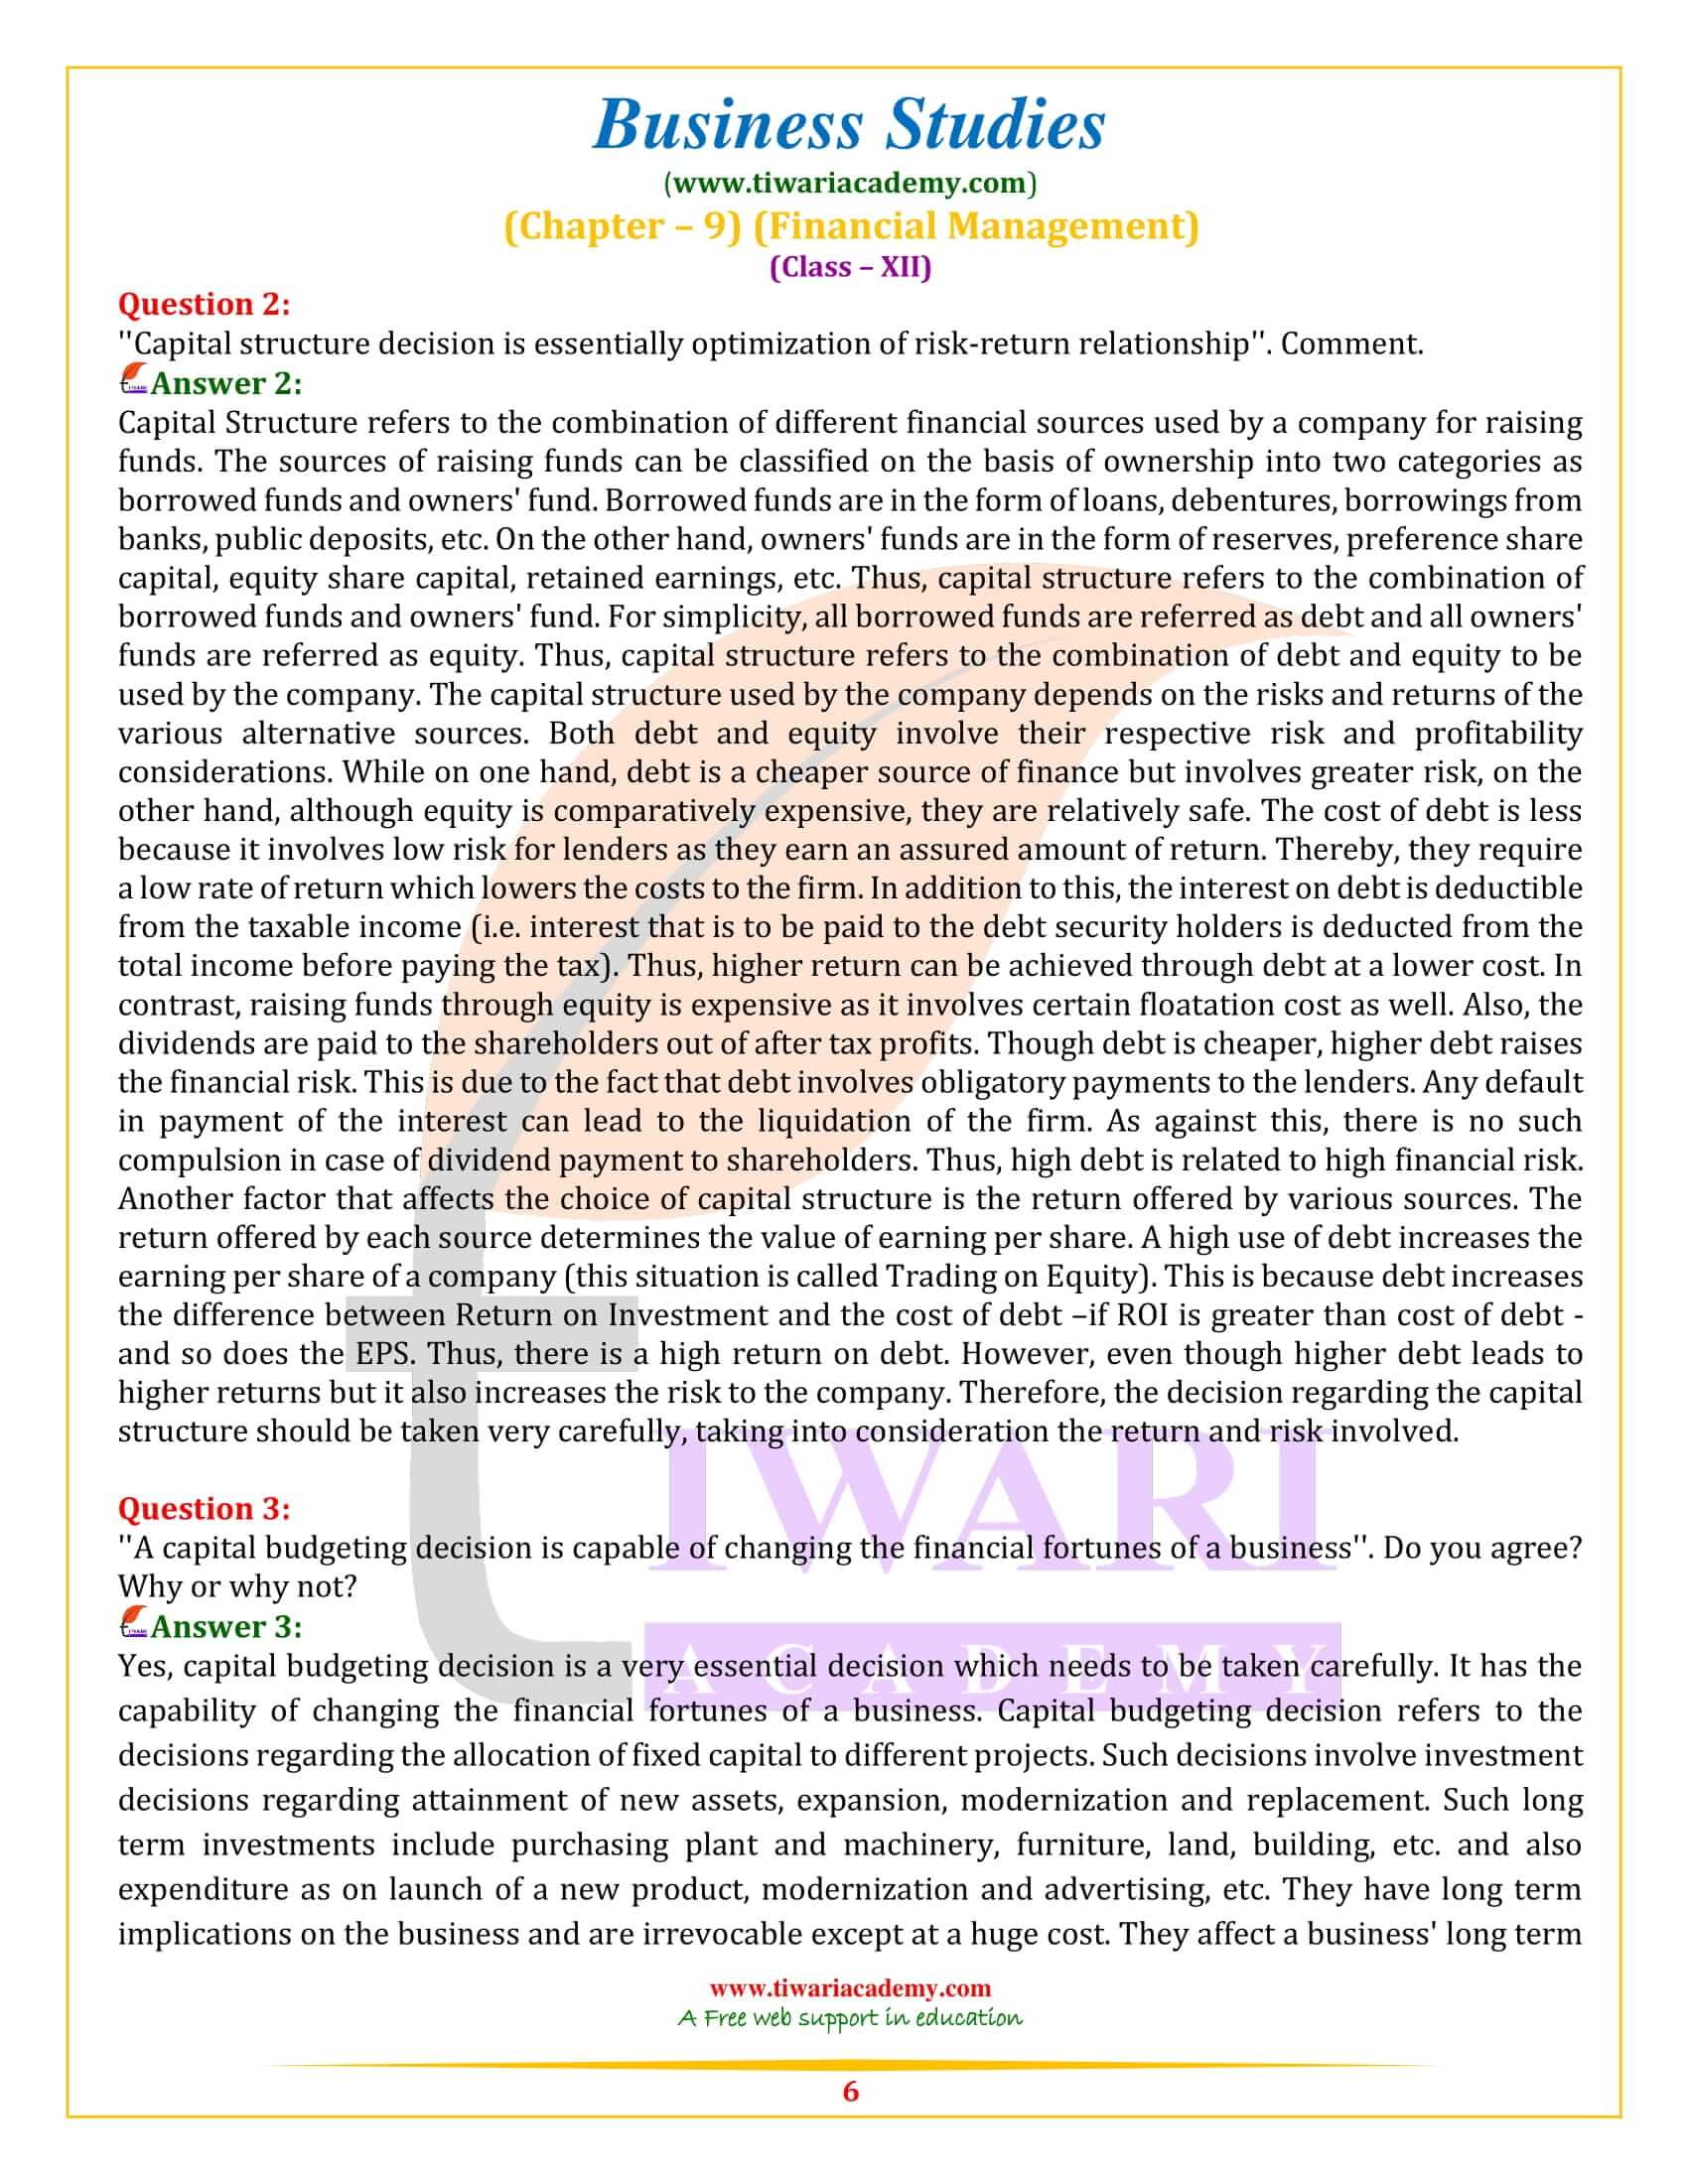 NCERT Solutions for Class 12 Business Studies Chapter 9 in English Medium